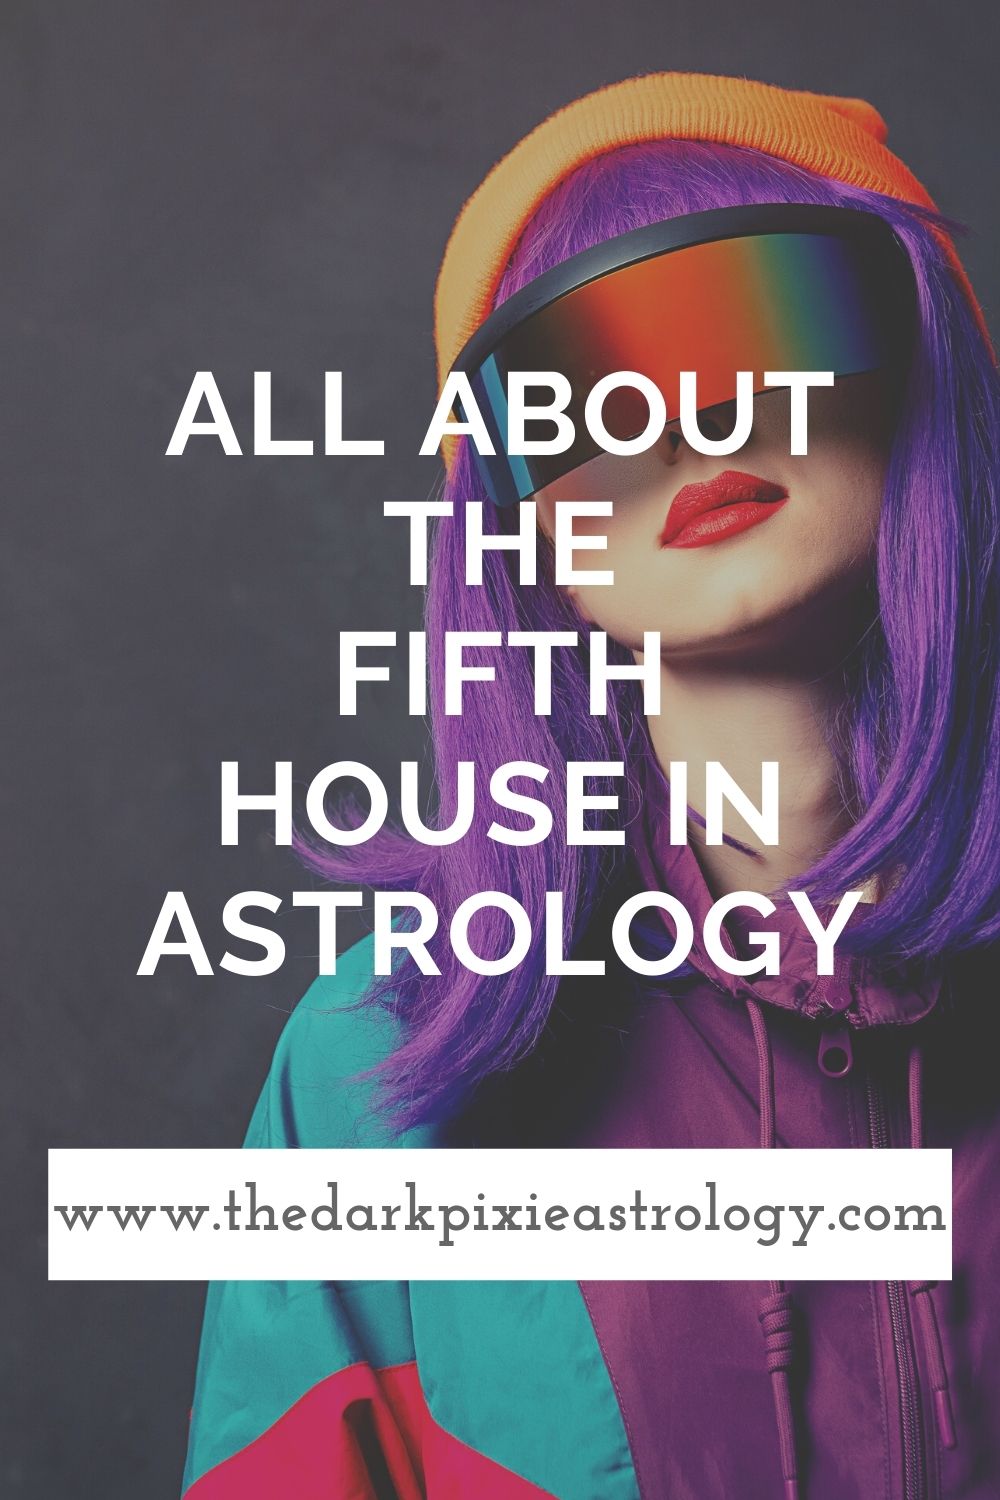 All About the Fifth House in Astrology - The Dark Pixie Astrology